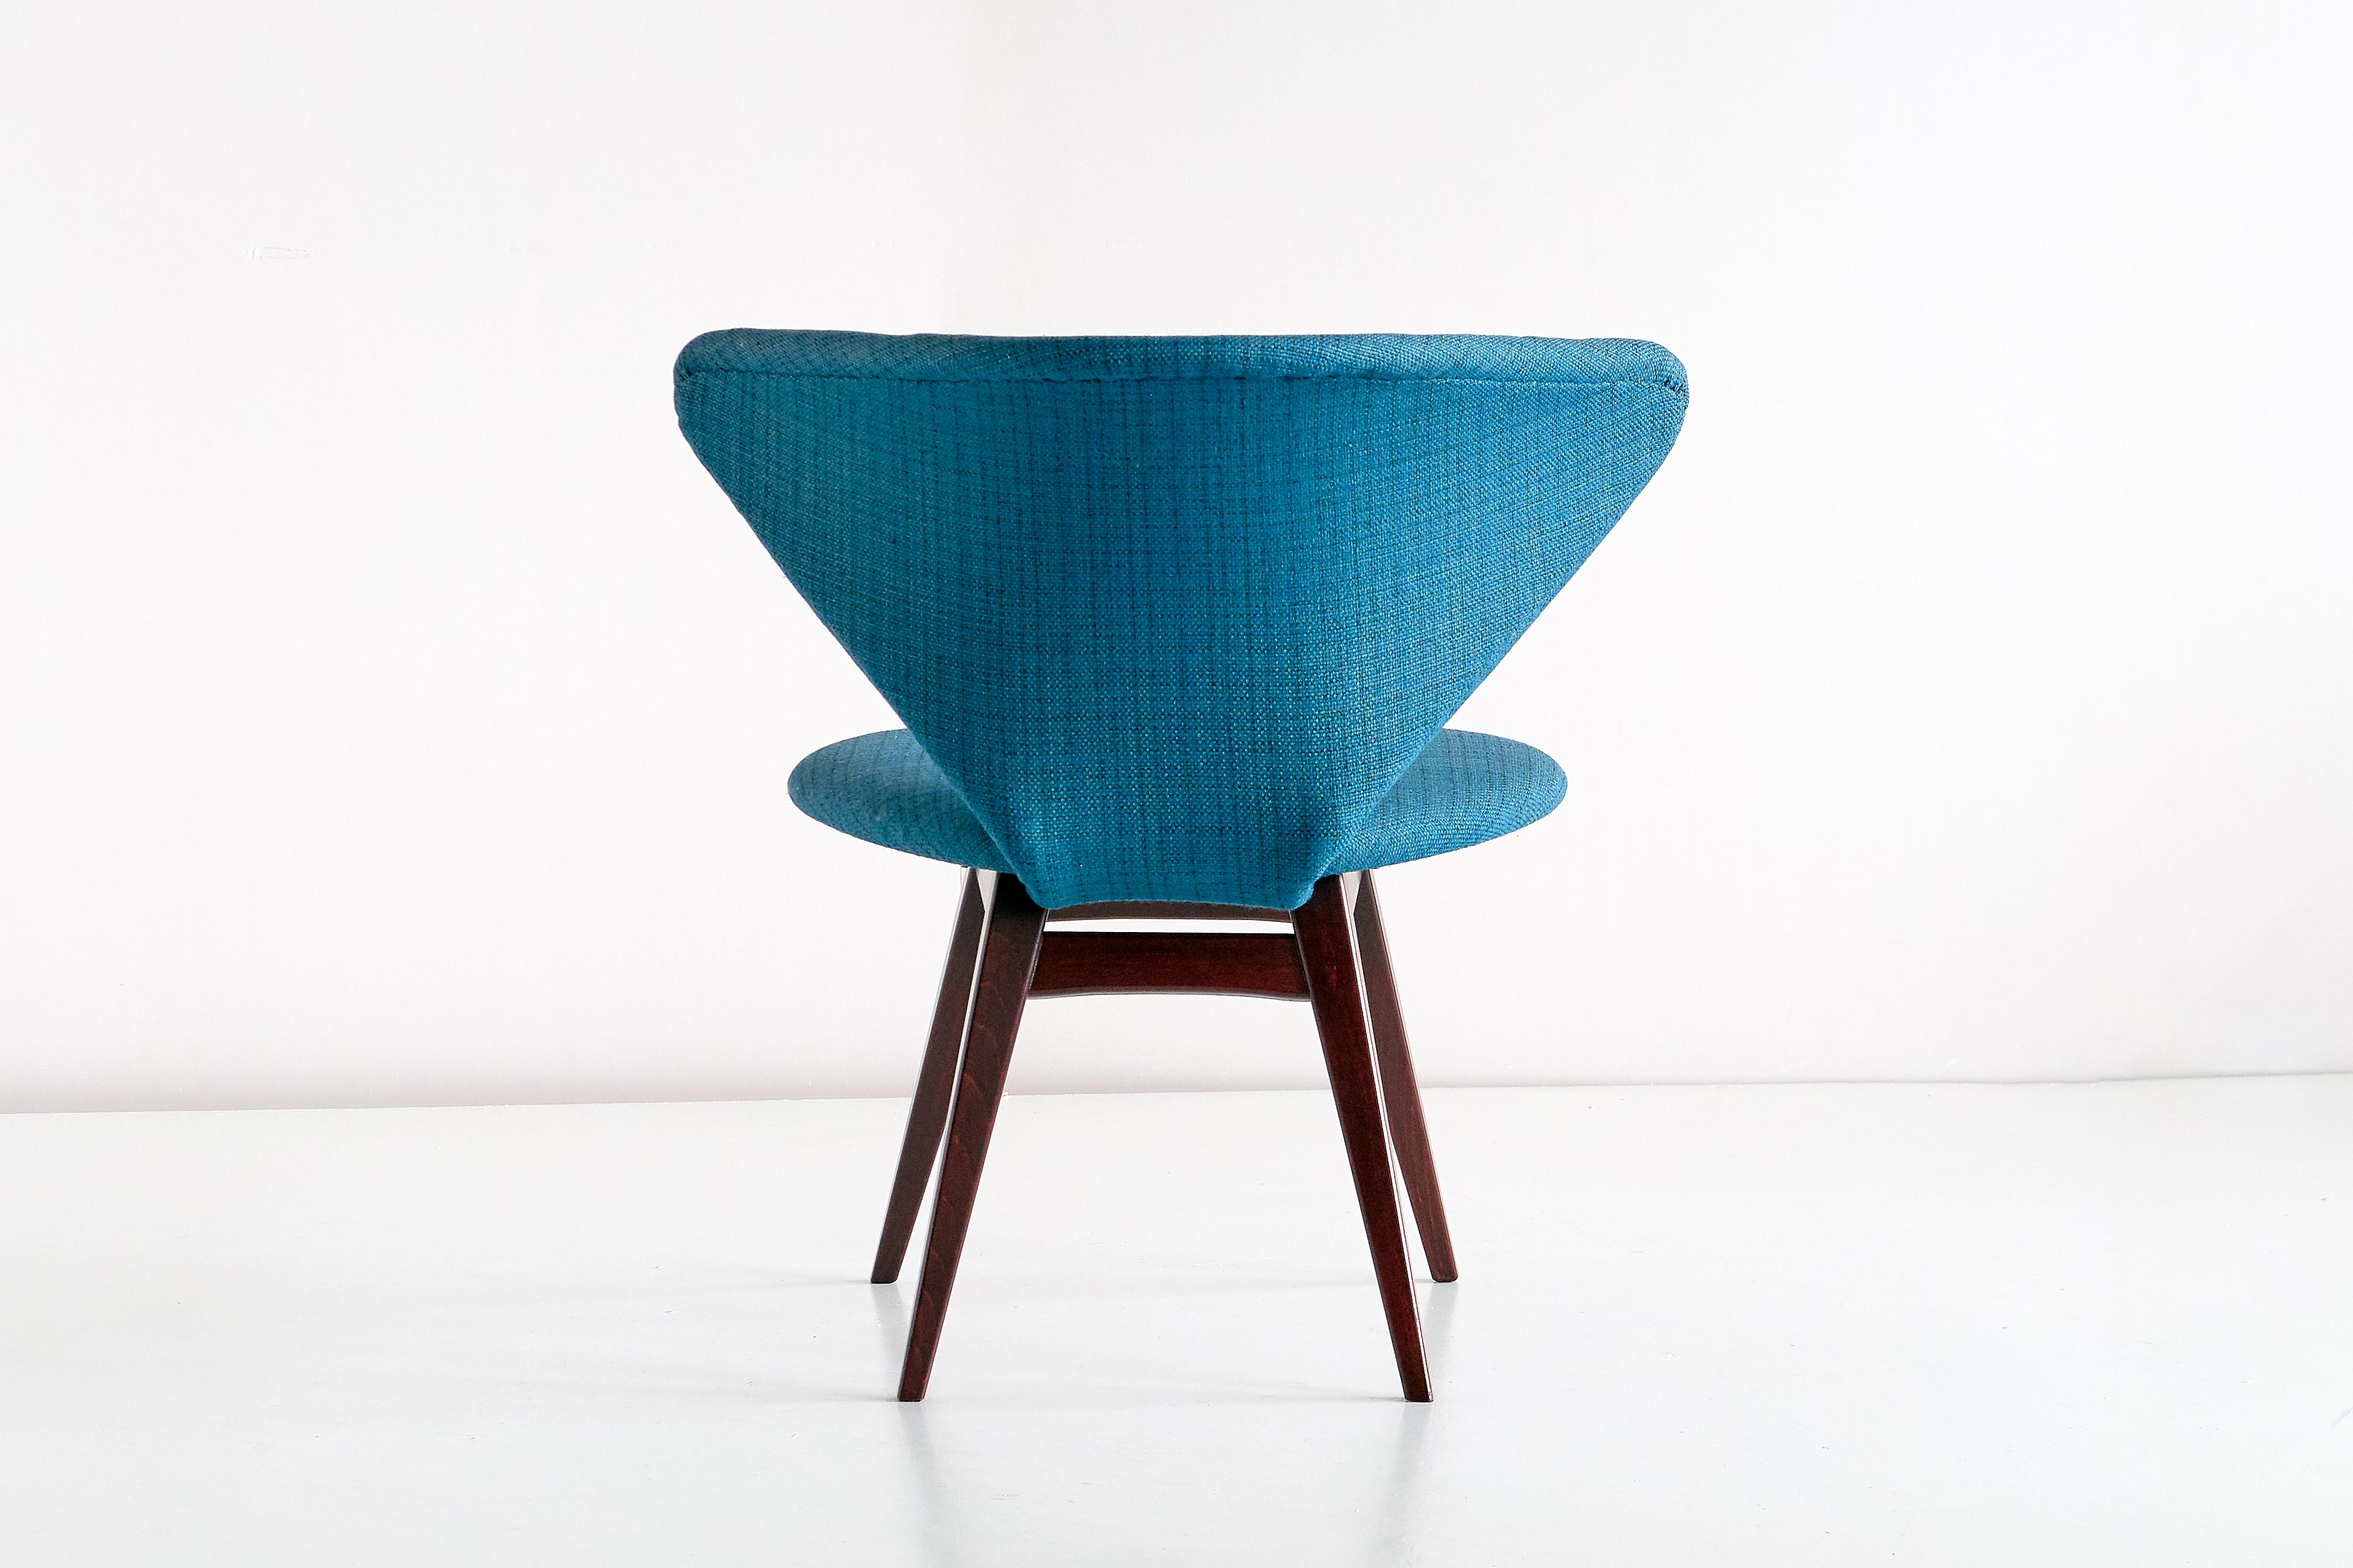 Sigfrid Ljungqvist Wing Shaped Chair, Petrol Blue Fabric and Beech, Sweden, 1958 For Sale 1